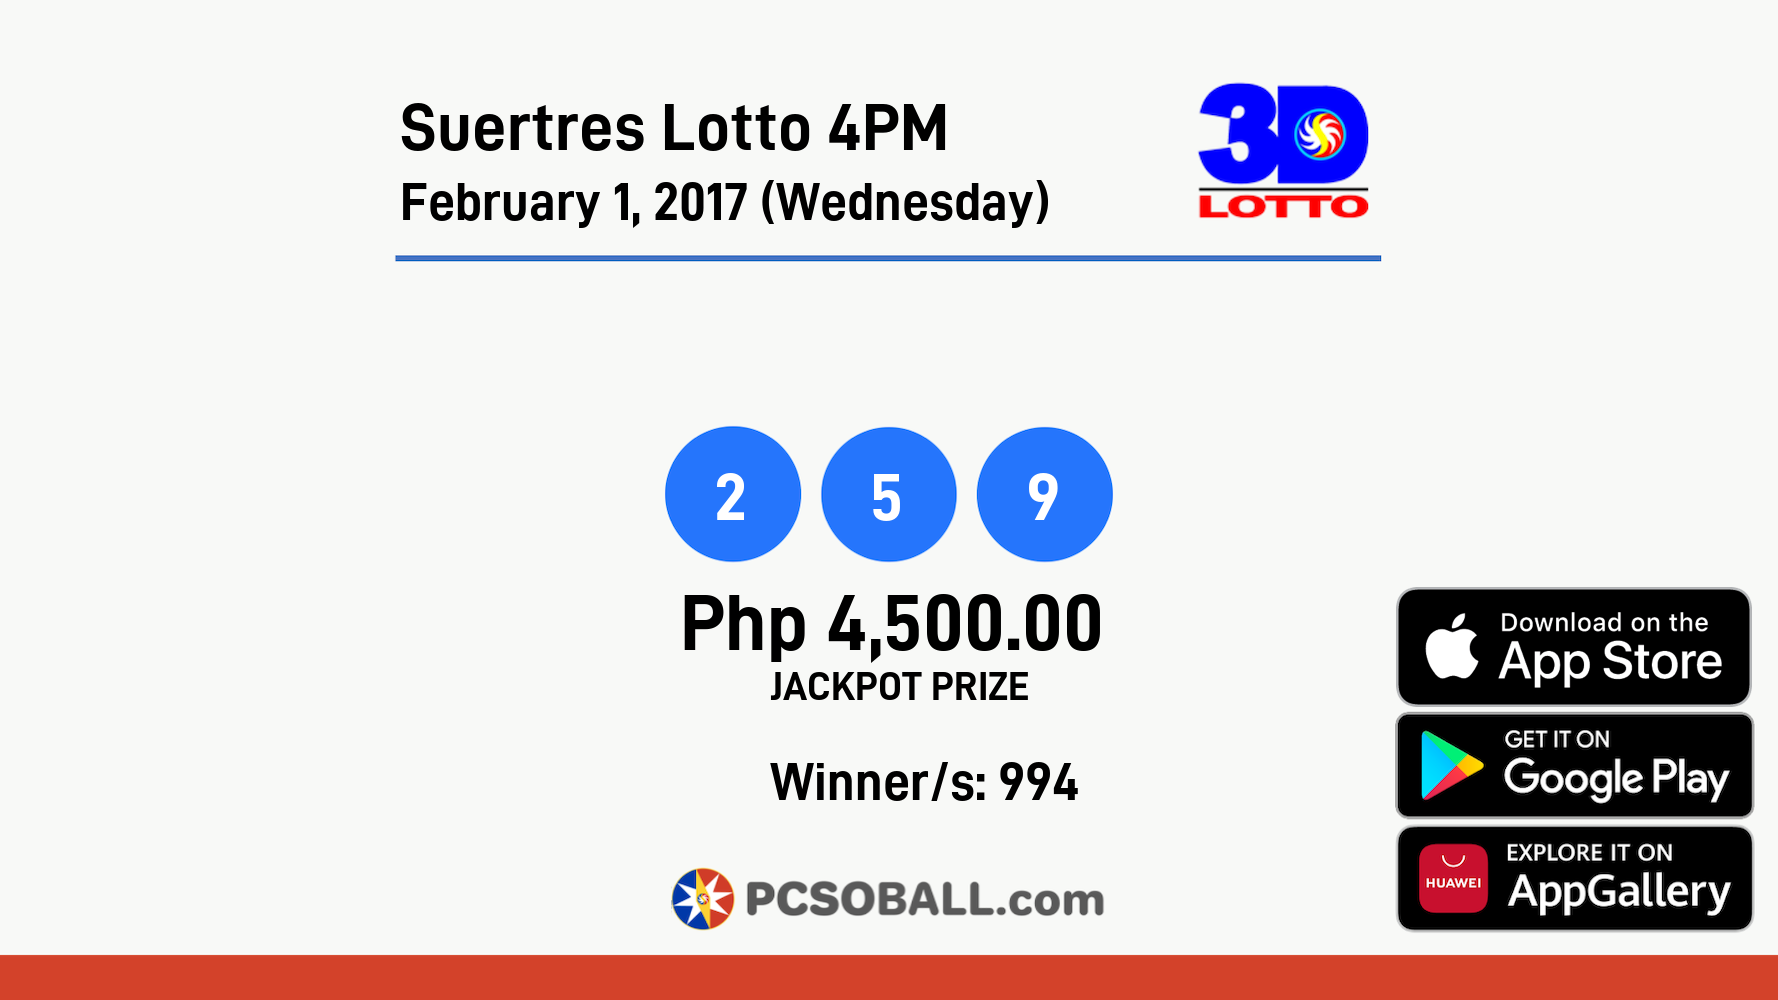 Suertres Lotto 4PM February 1, 2017 (Wednesday) Result